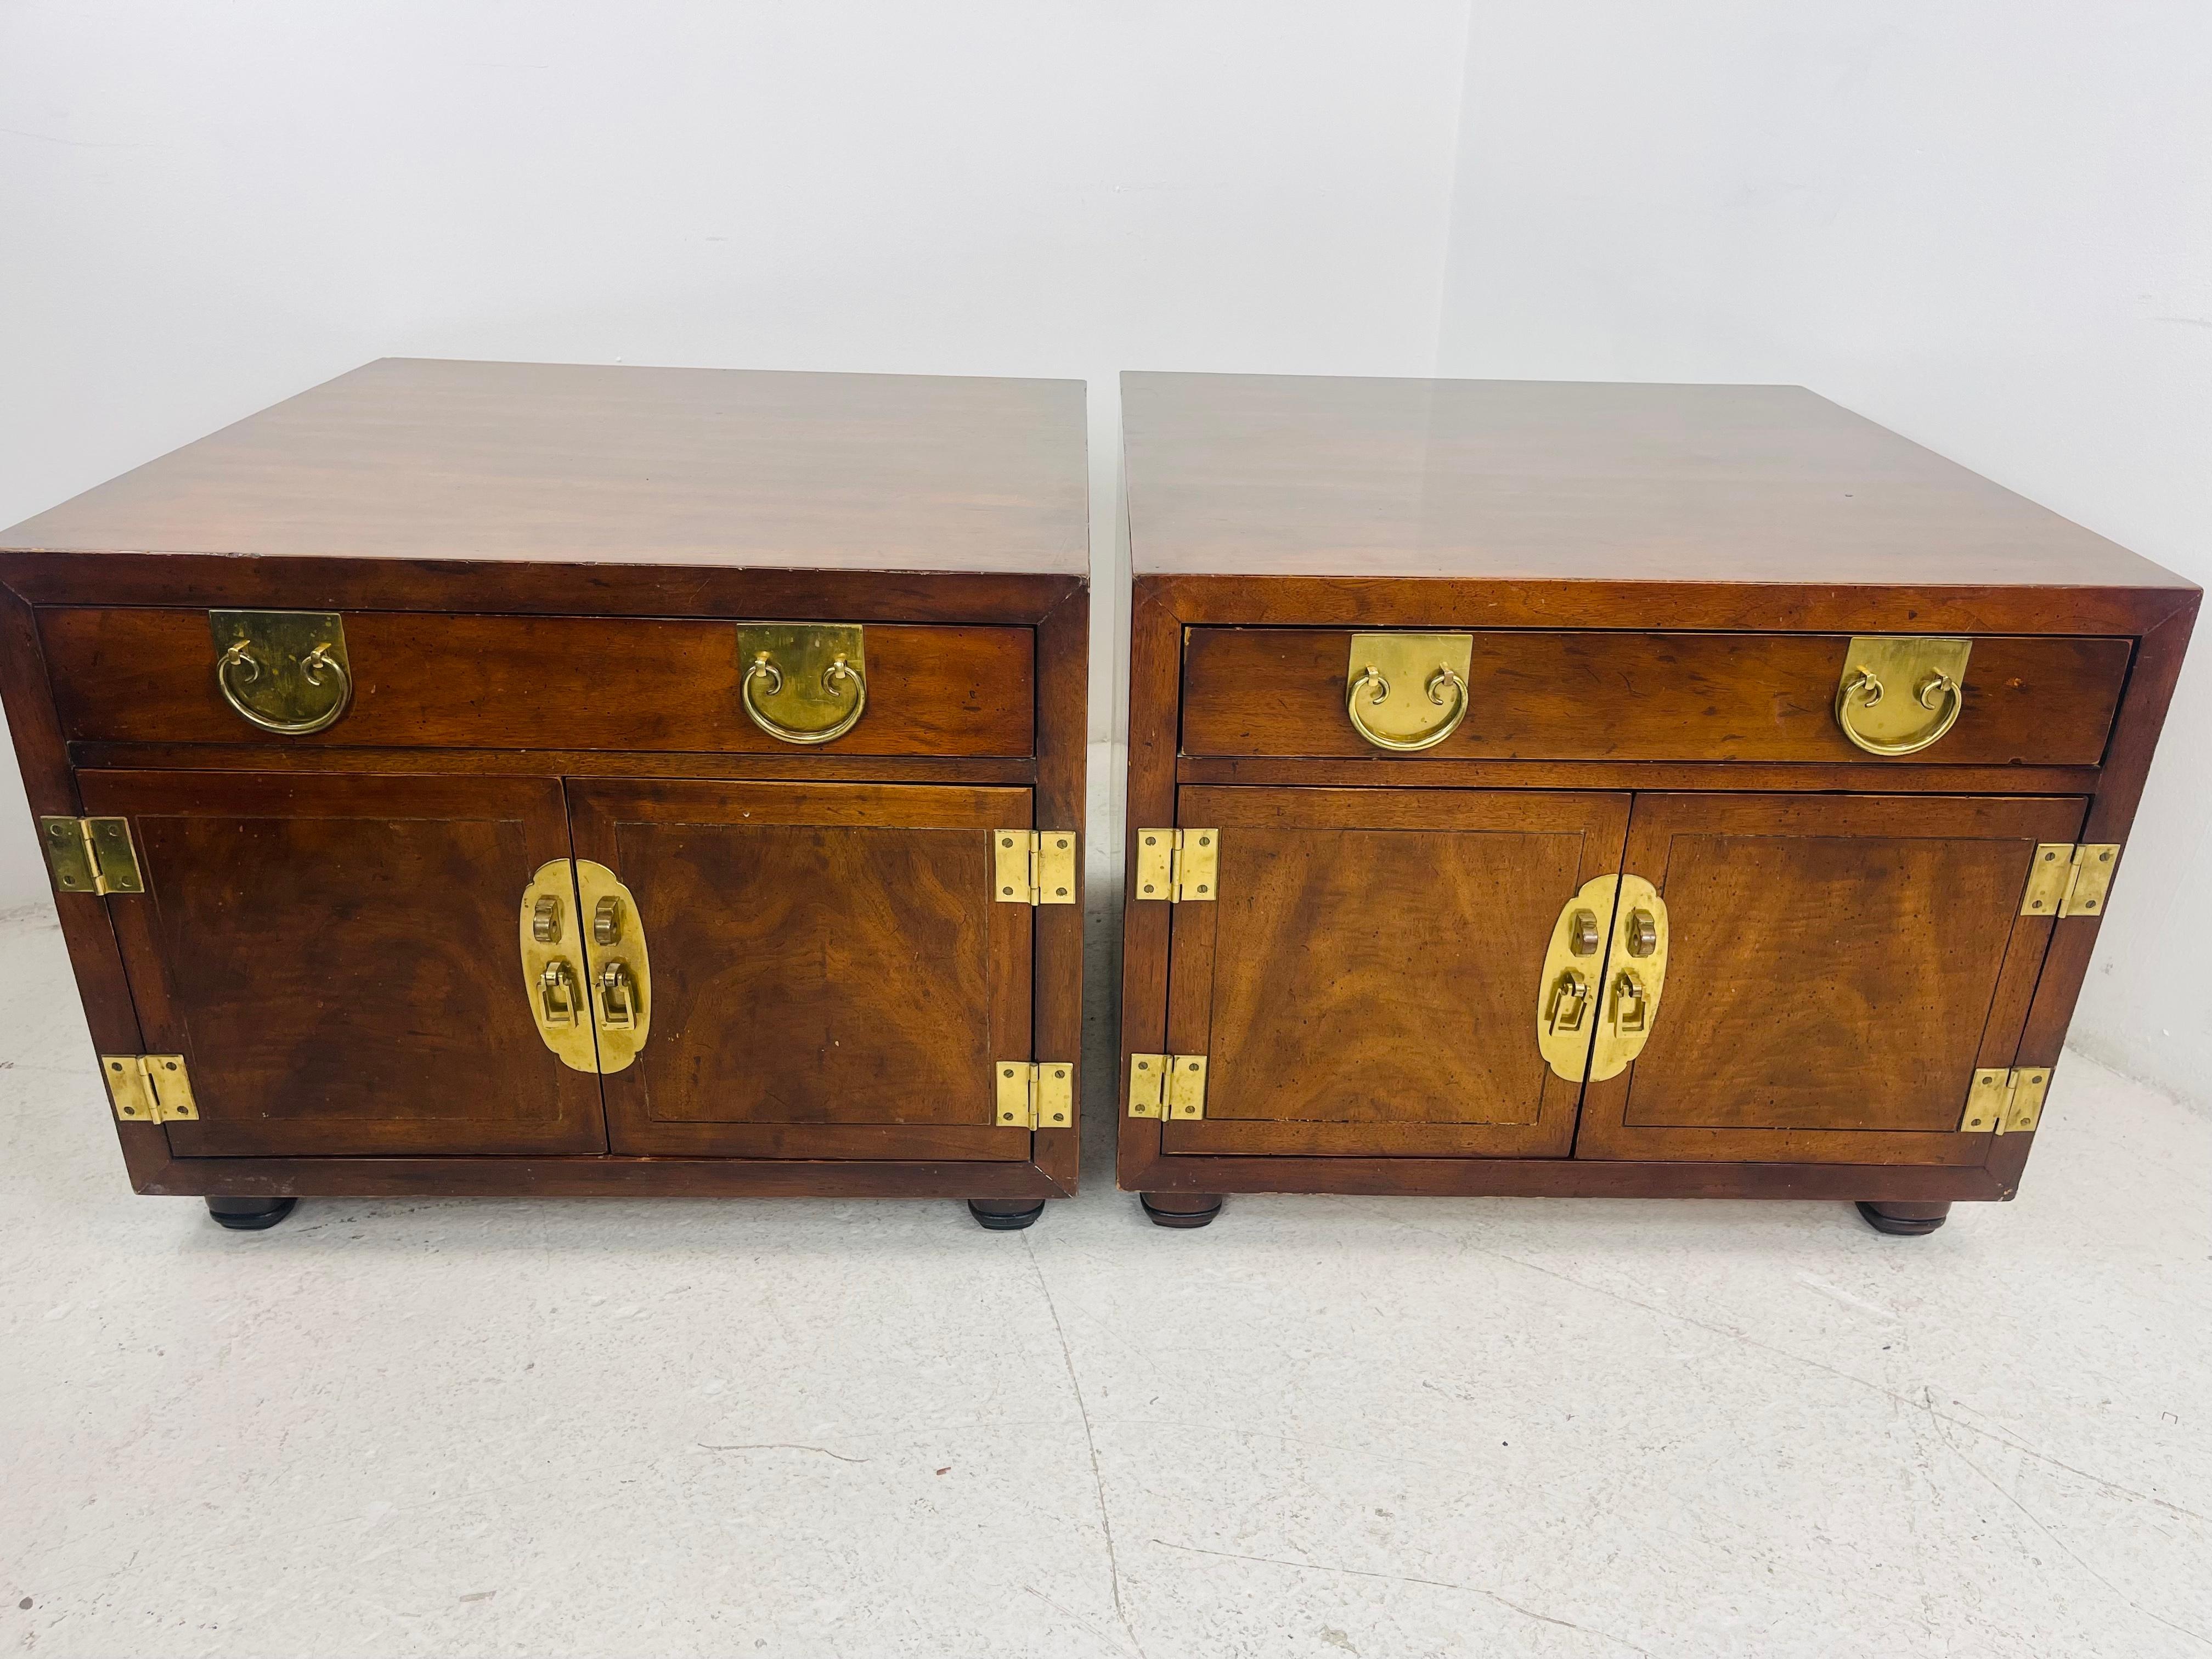 A fantastic pair of Henredon Chinoiserie campaign chests in good condition. Circa 1970s. Handsome solid brass hardware accents. Exceptional craftsmanship and detail. Some scratches and dings on front/edges due to age and use but tops are in great